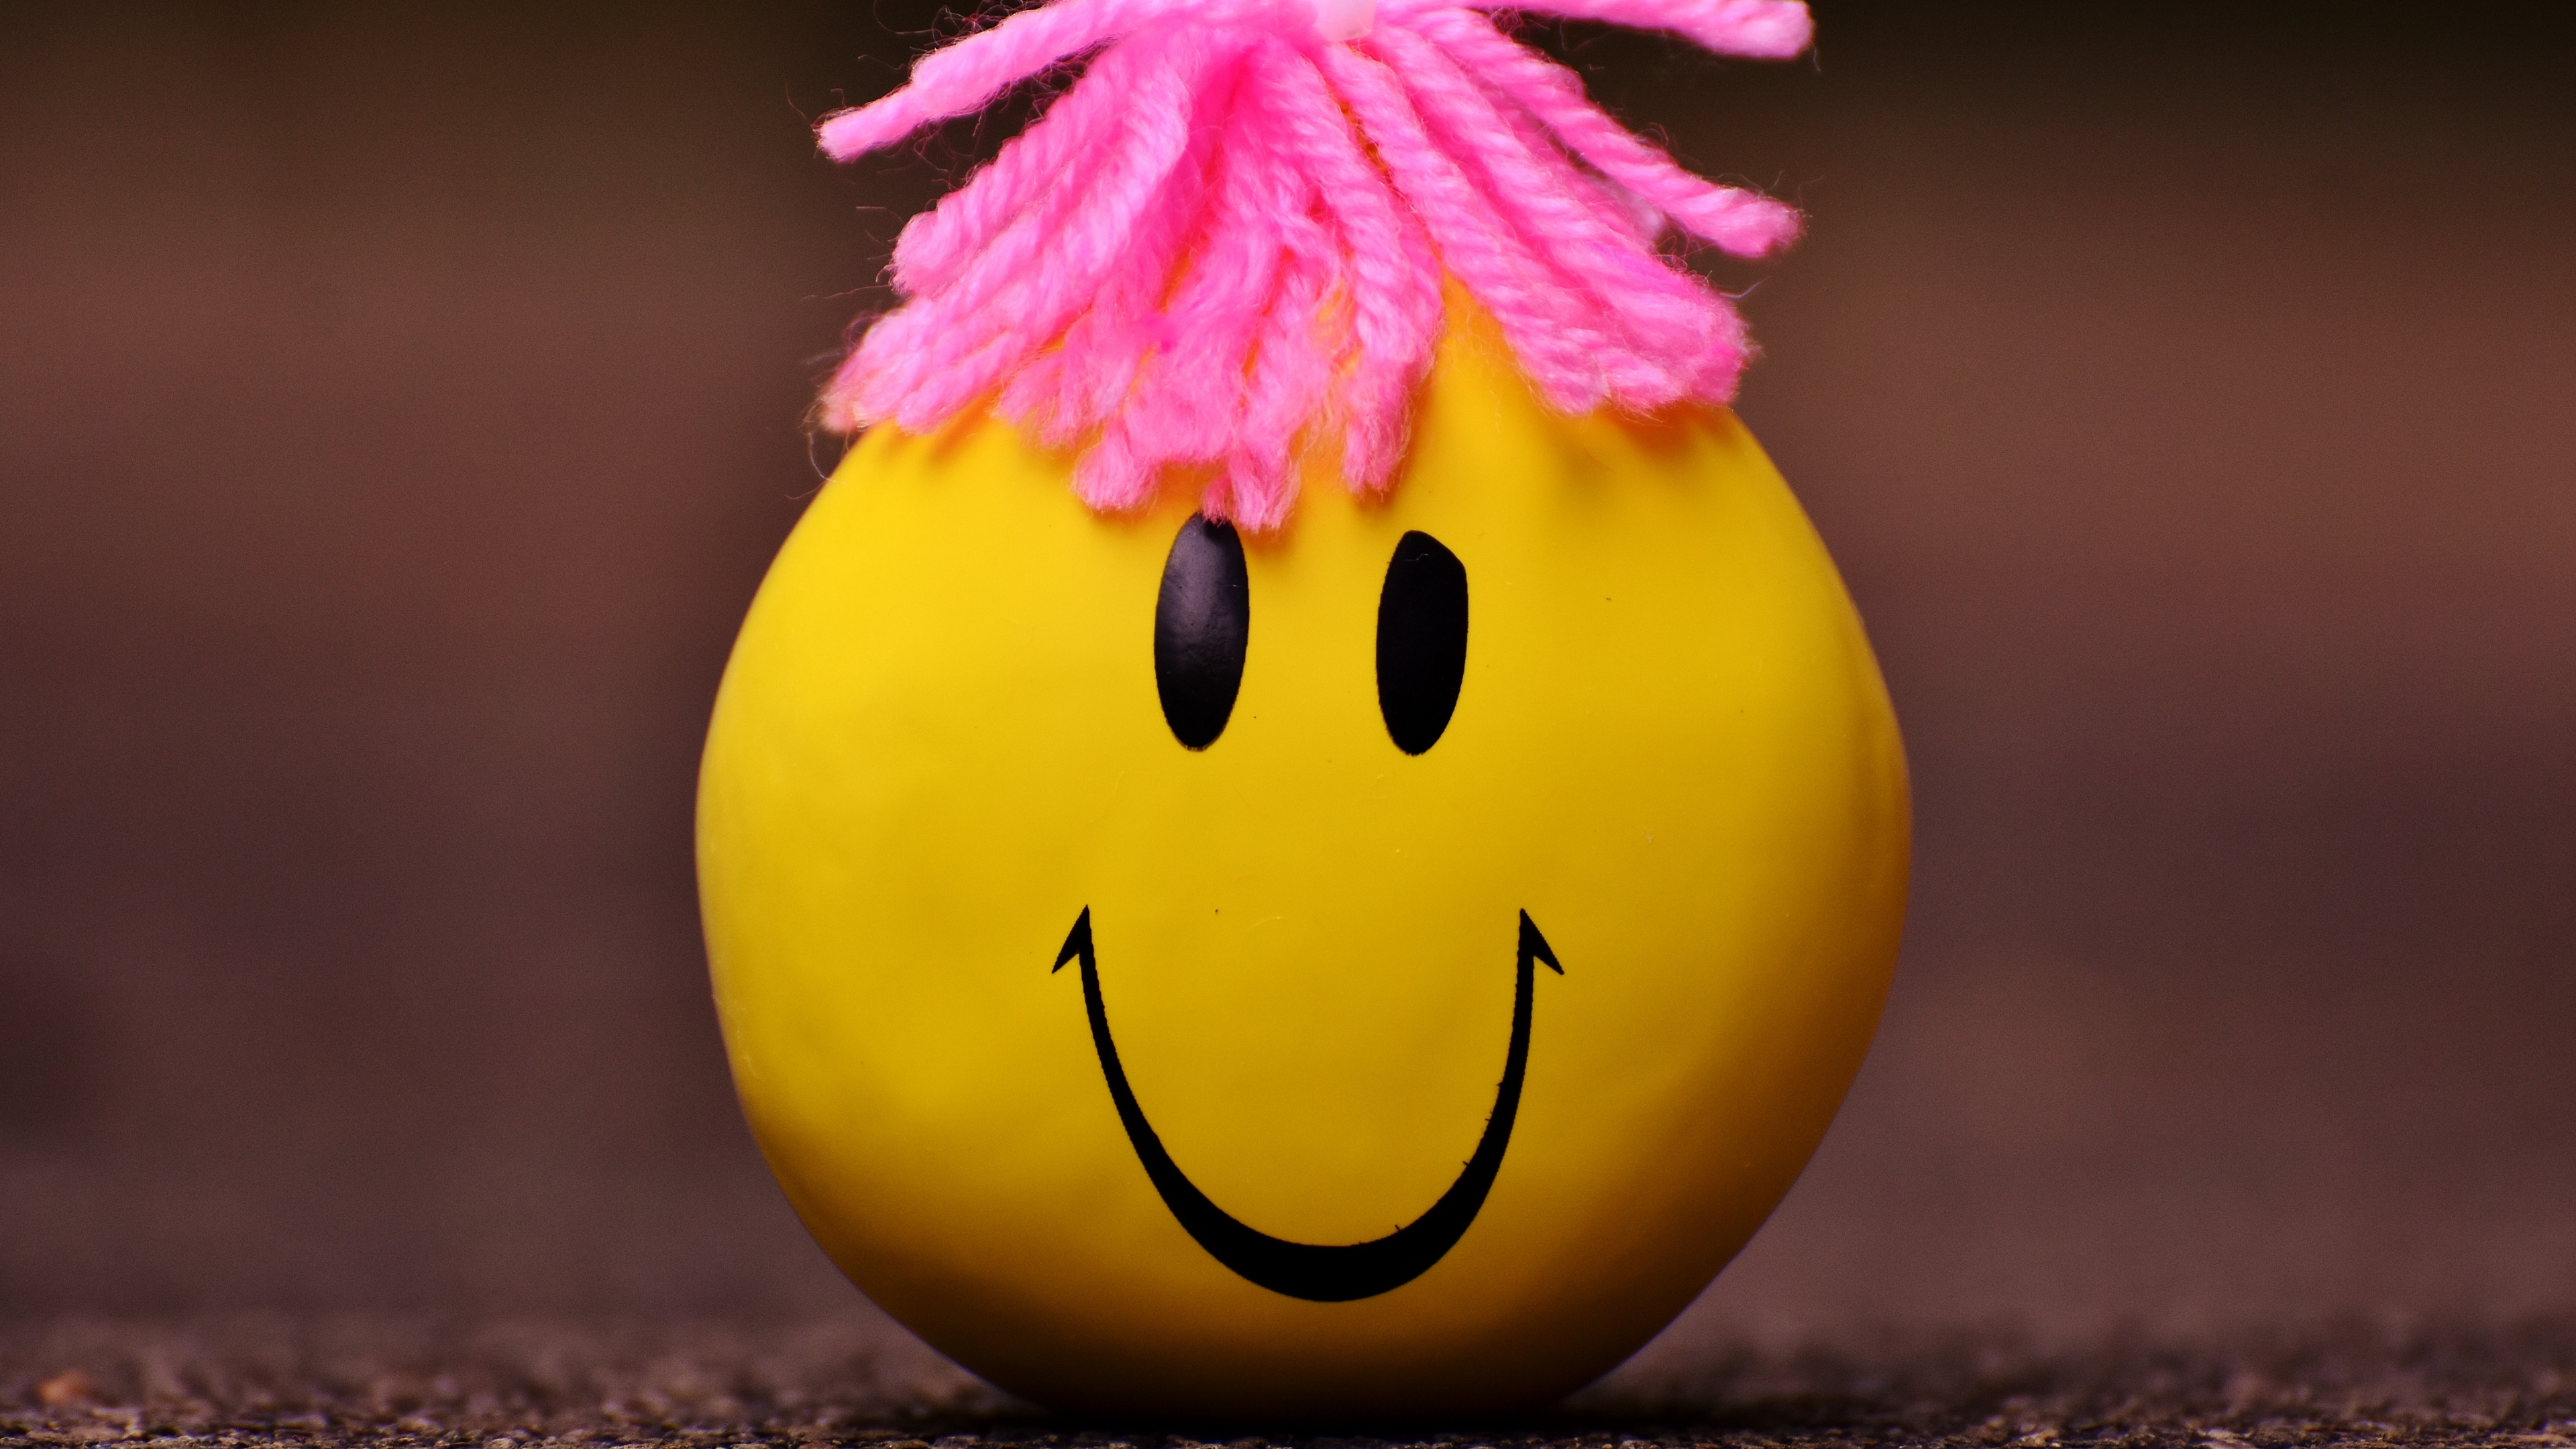 Desktop Wallpaper Yellow Smiley Ball, Toys, Funny, HD Image, Picture, Background, 2c5295